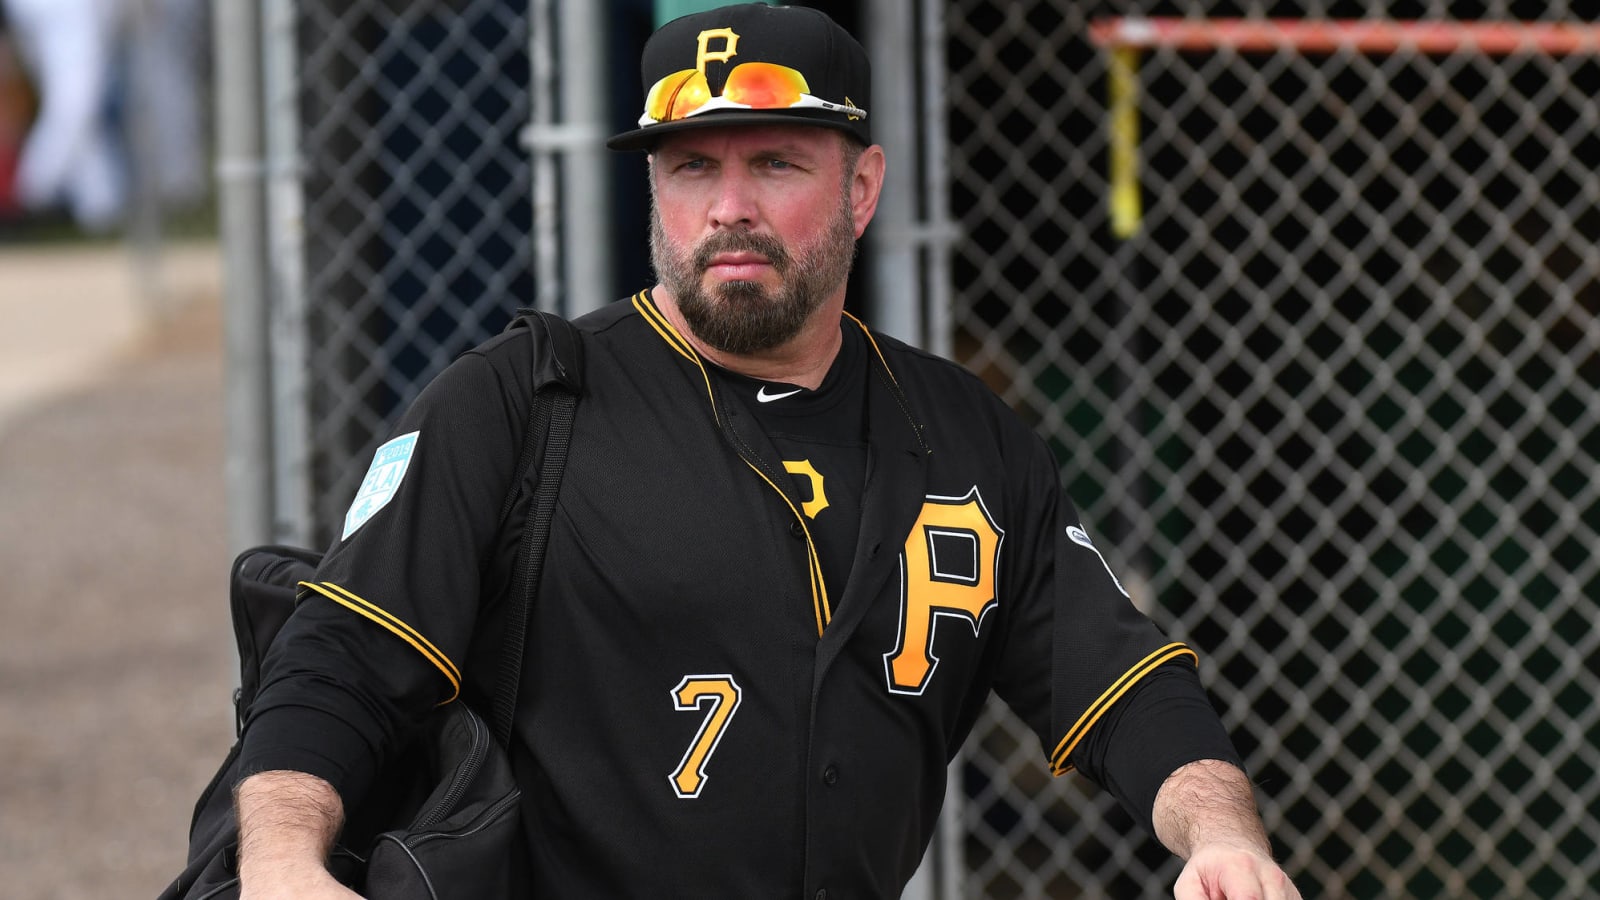 Garth Brooks opens up about Roberto Clemente inspiring his love for baseball